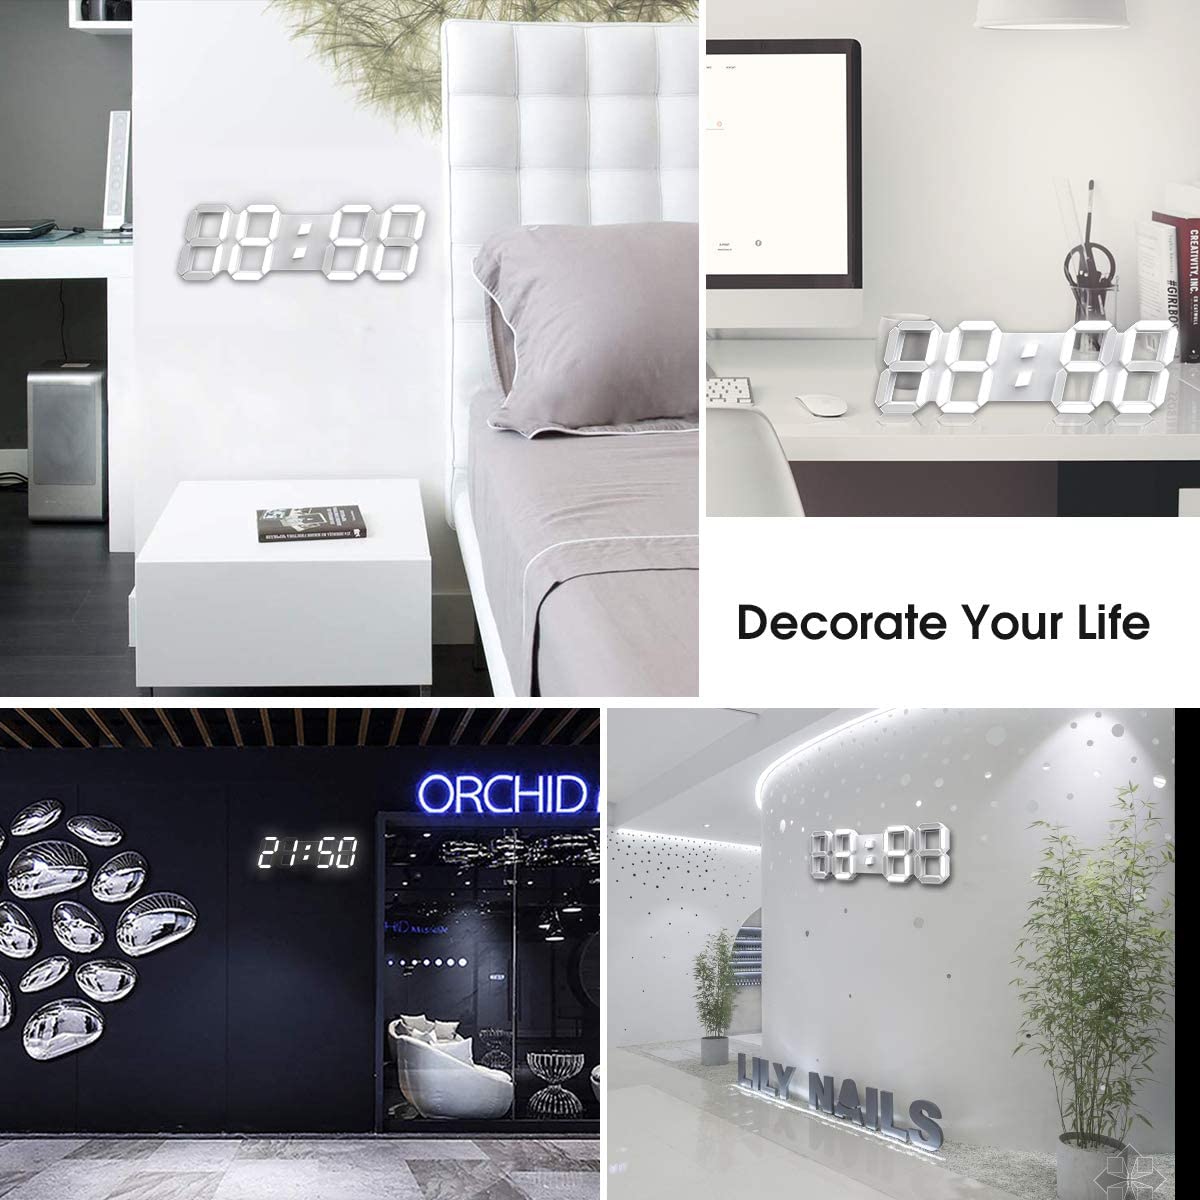 3D LED Digital Wall Clock 15” Remote Control Timer Nightlight Alarm Clock for Office Home Living Room Home Gym